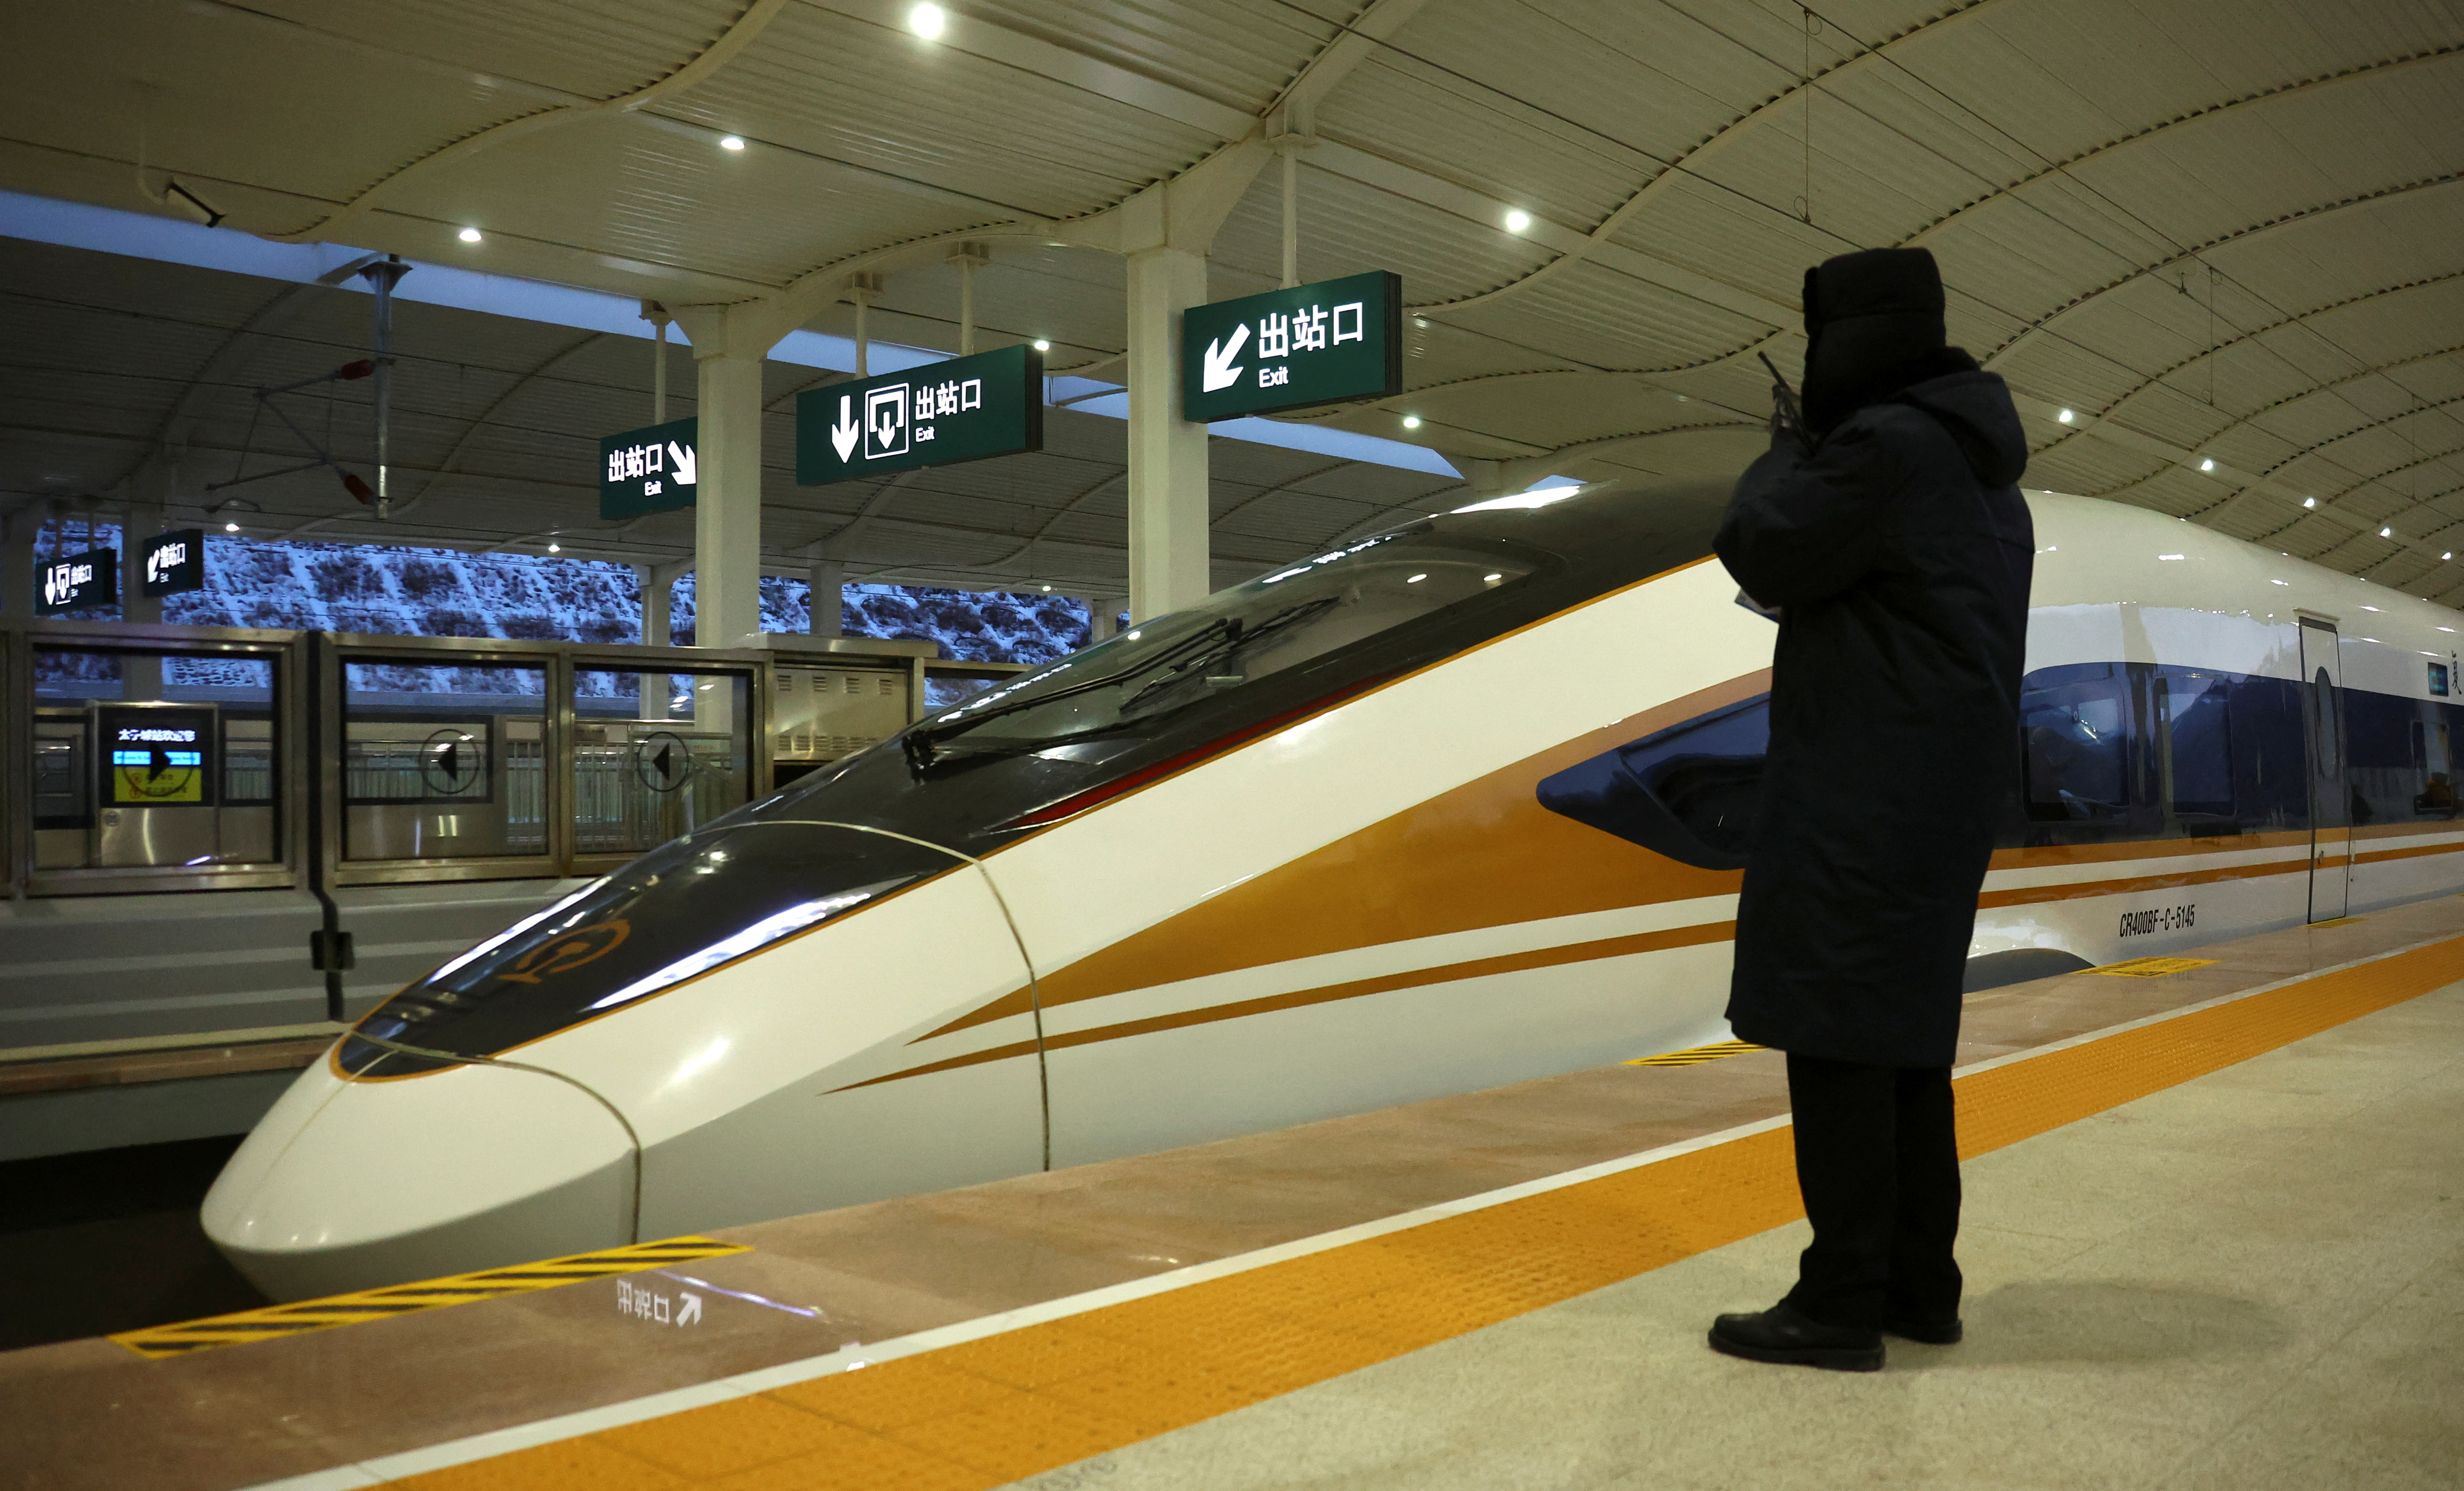 Chinese railway staff stands beside a high-speed train at Zhangjiakou cluster train station inside a closed loop area designed to prevent the spread of the coronavirus disease (COVID-19) in Zhangjiakou, China January 25, 2022. REUTERS/Fabrizio Bensch